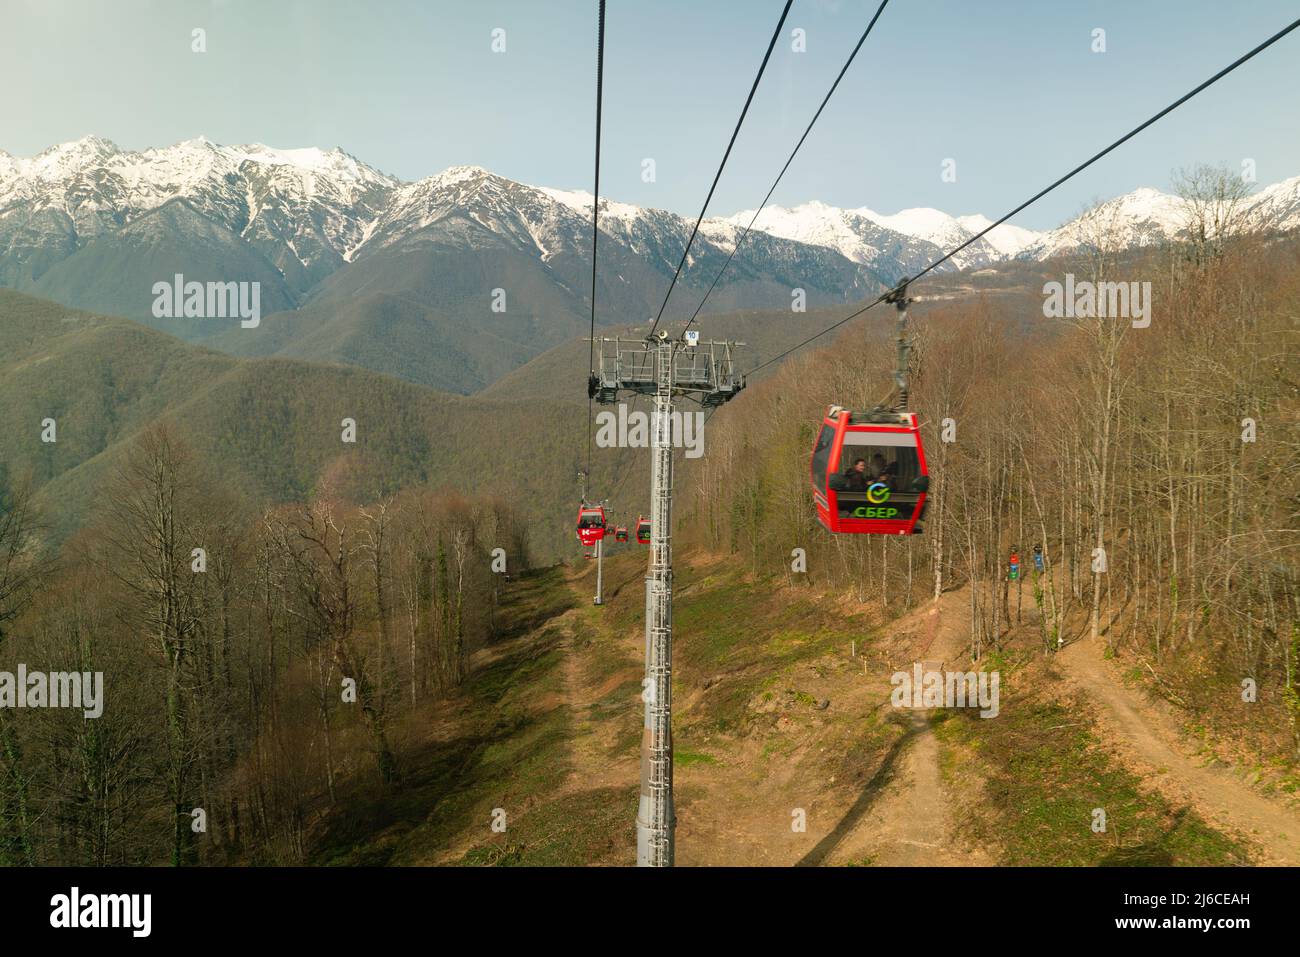 Sochi, Russia - April 23, 2022: Scenic mountain landscape with cable car of Krasnaya Polyana resort. Cable lift cabins with a view of the Caucasus Mou Stock Photo